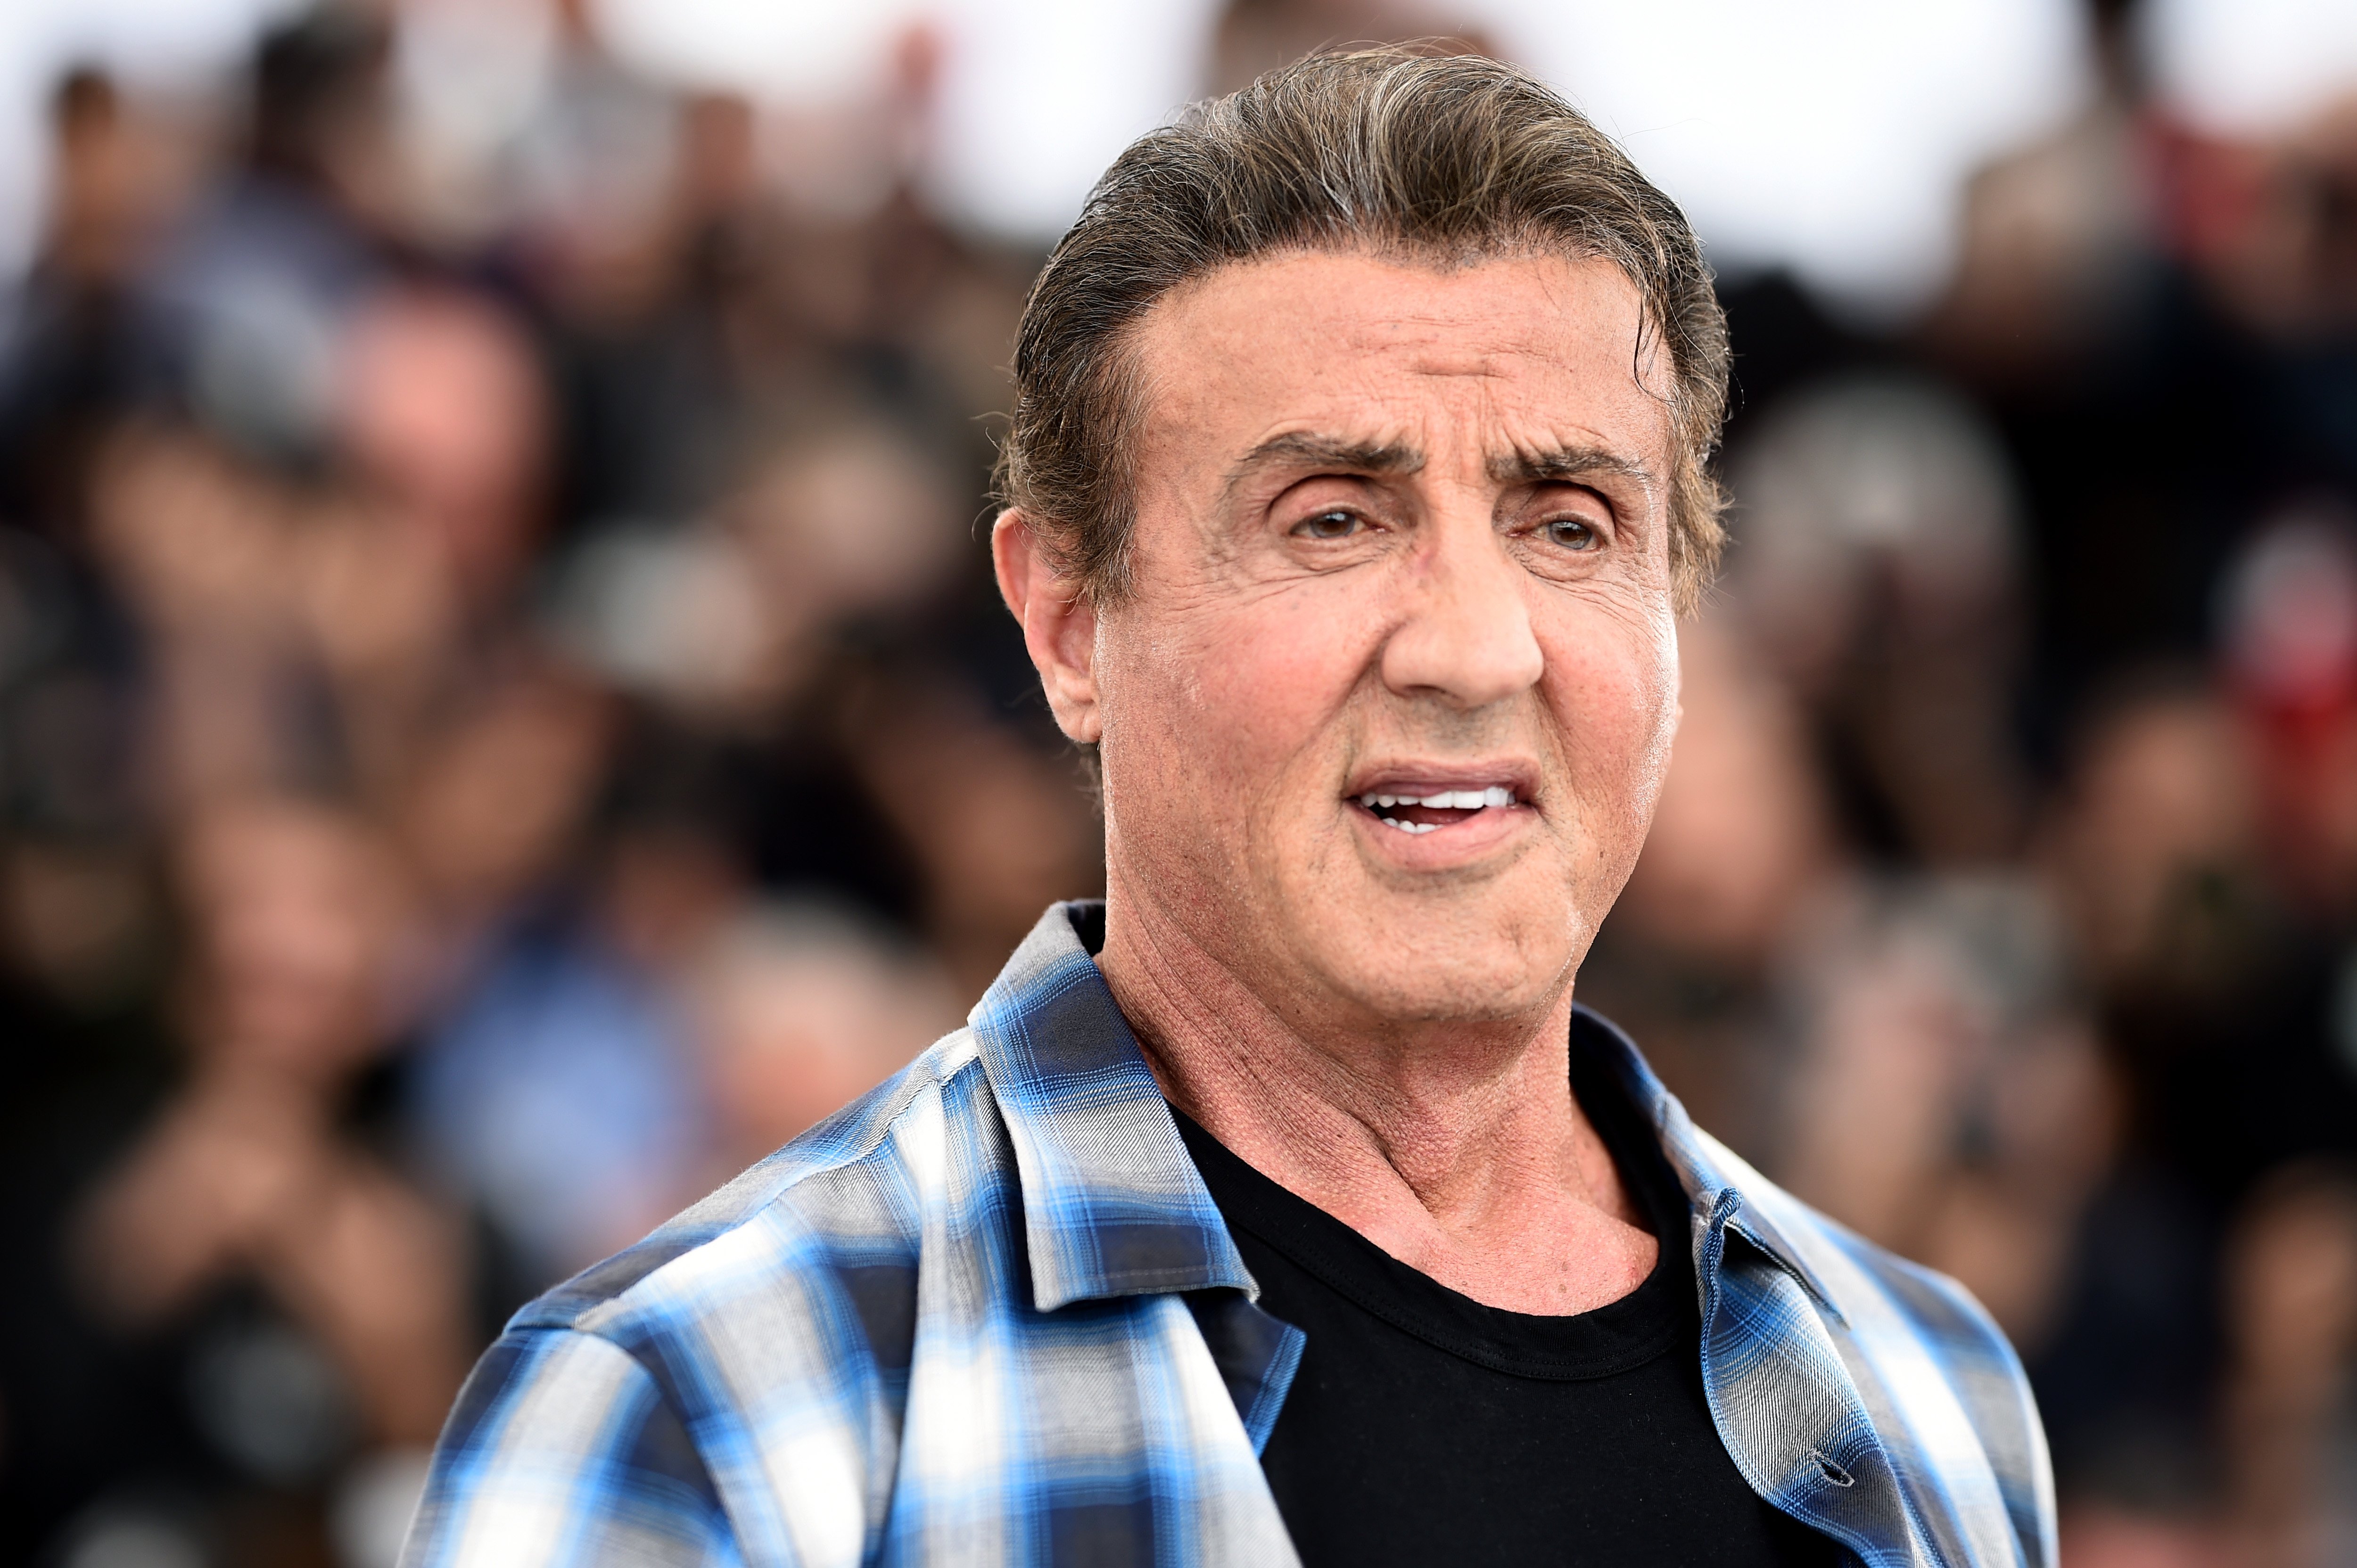 Sylvester Stallone attends the photocall for "Sylvester Stallone & Rambo V: Last Blood" at the 72nd annual Cannes Film Festival on May 24, 2019 in Cannes, France. | Photo: Getty Images